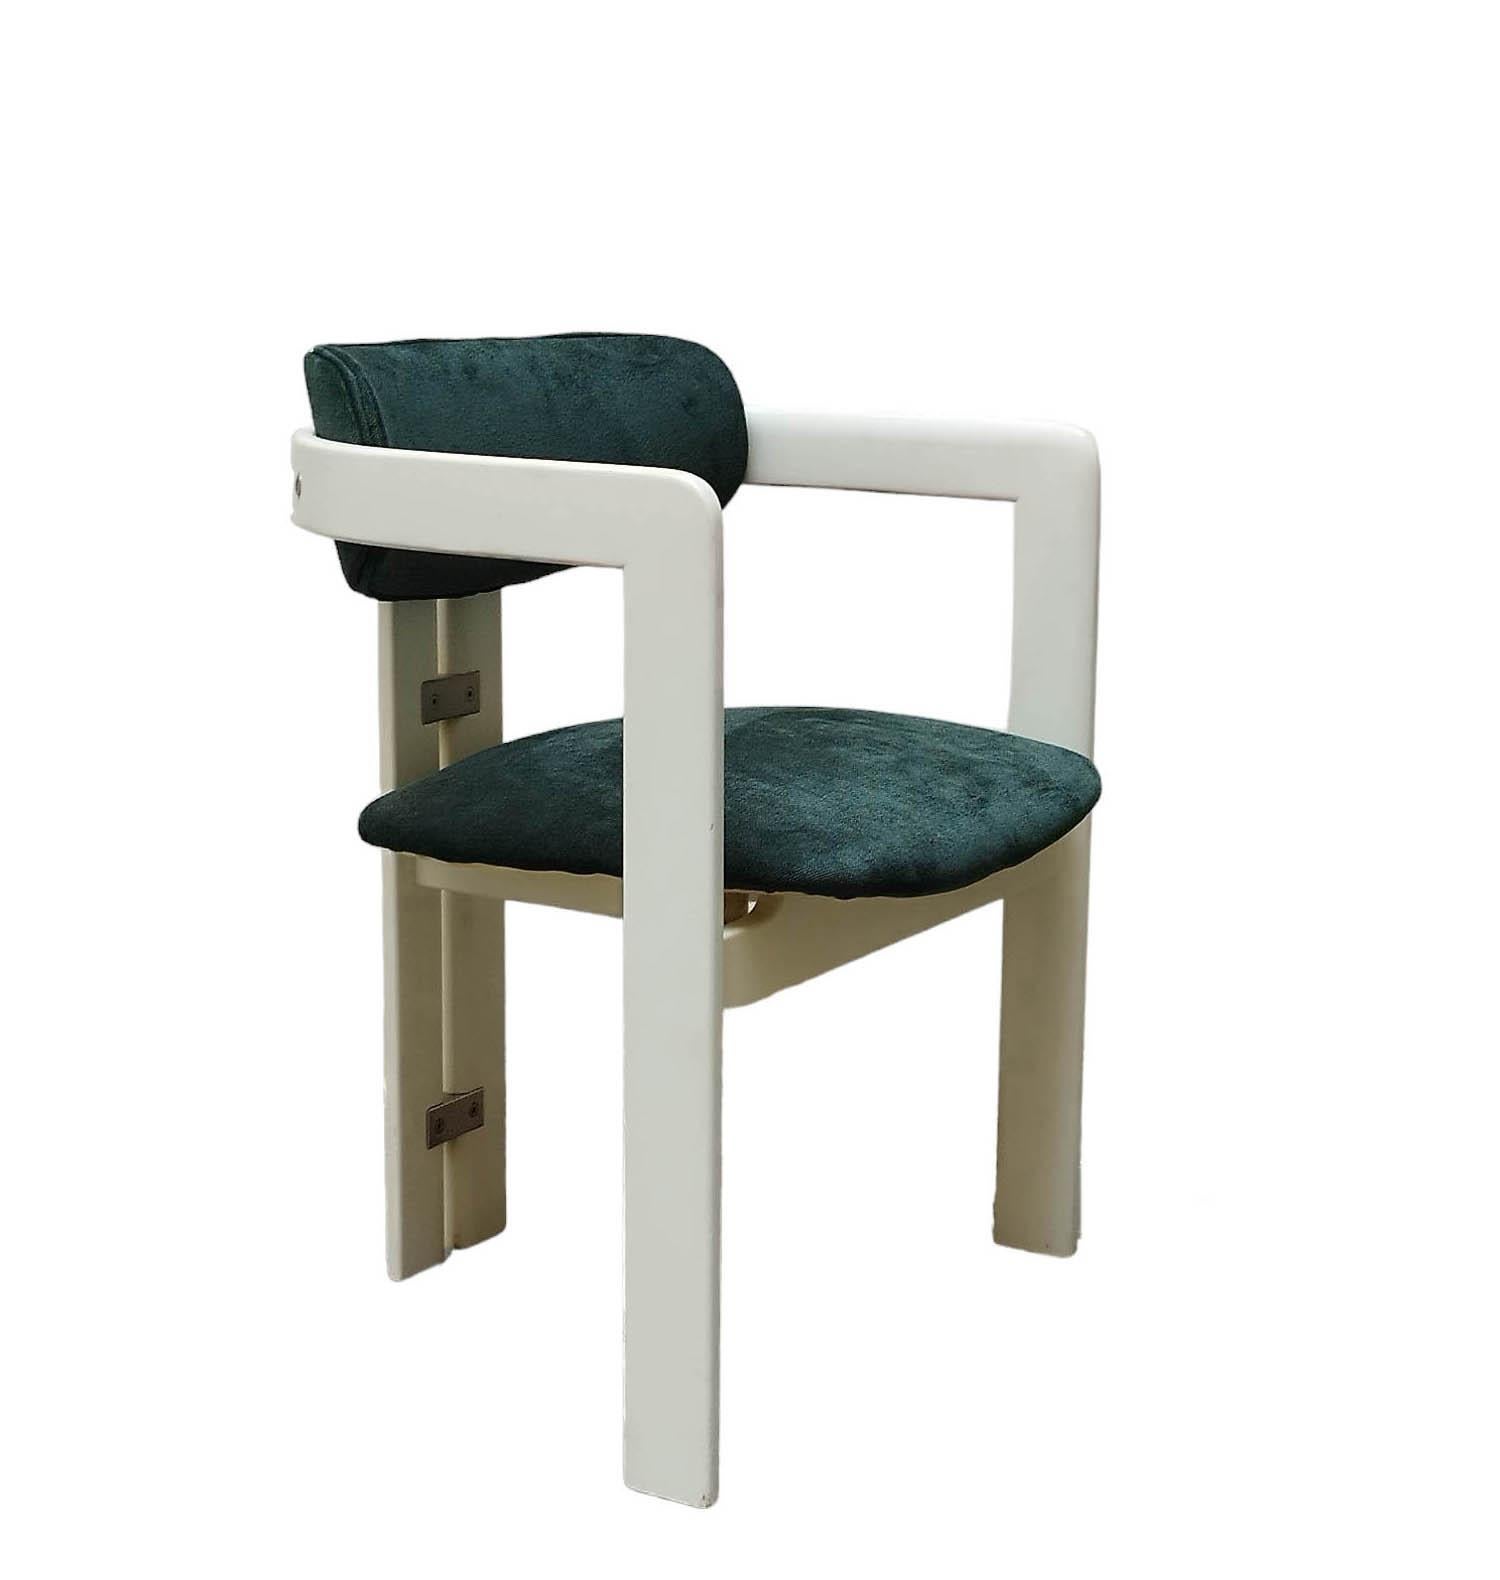 the Pampelona chair designed by Augusto Savini in the 1960s is a model prized for its massive wooden frame that forms two arches on the back feet and joints with steel pieces.
It is upholstered in green fabric for the seat and back, with a seat